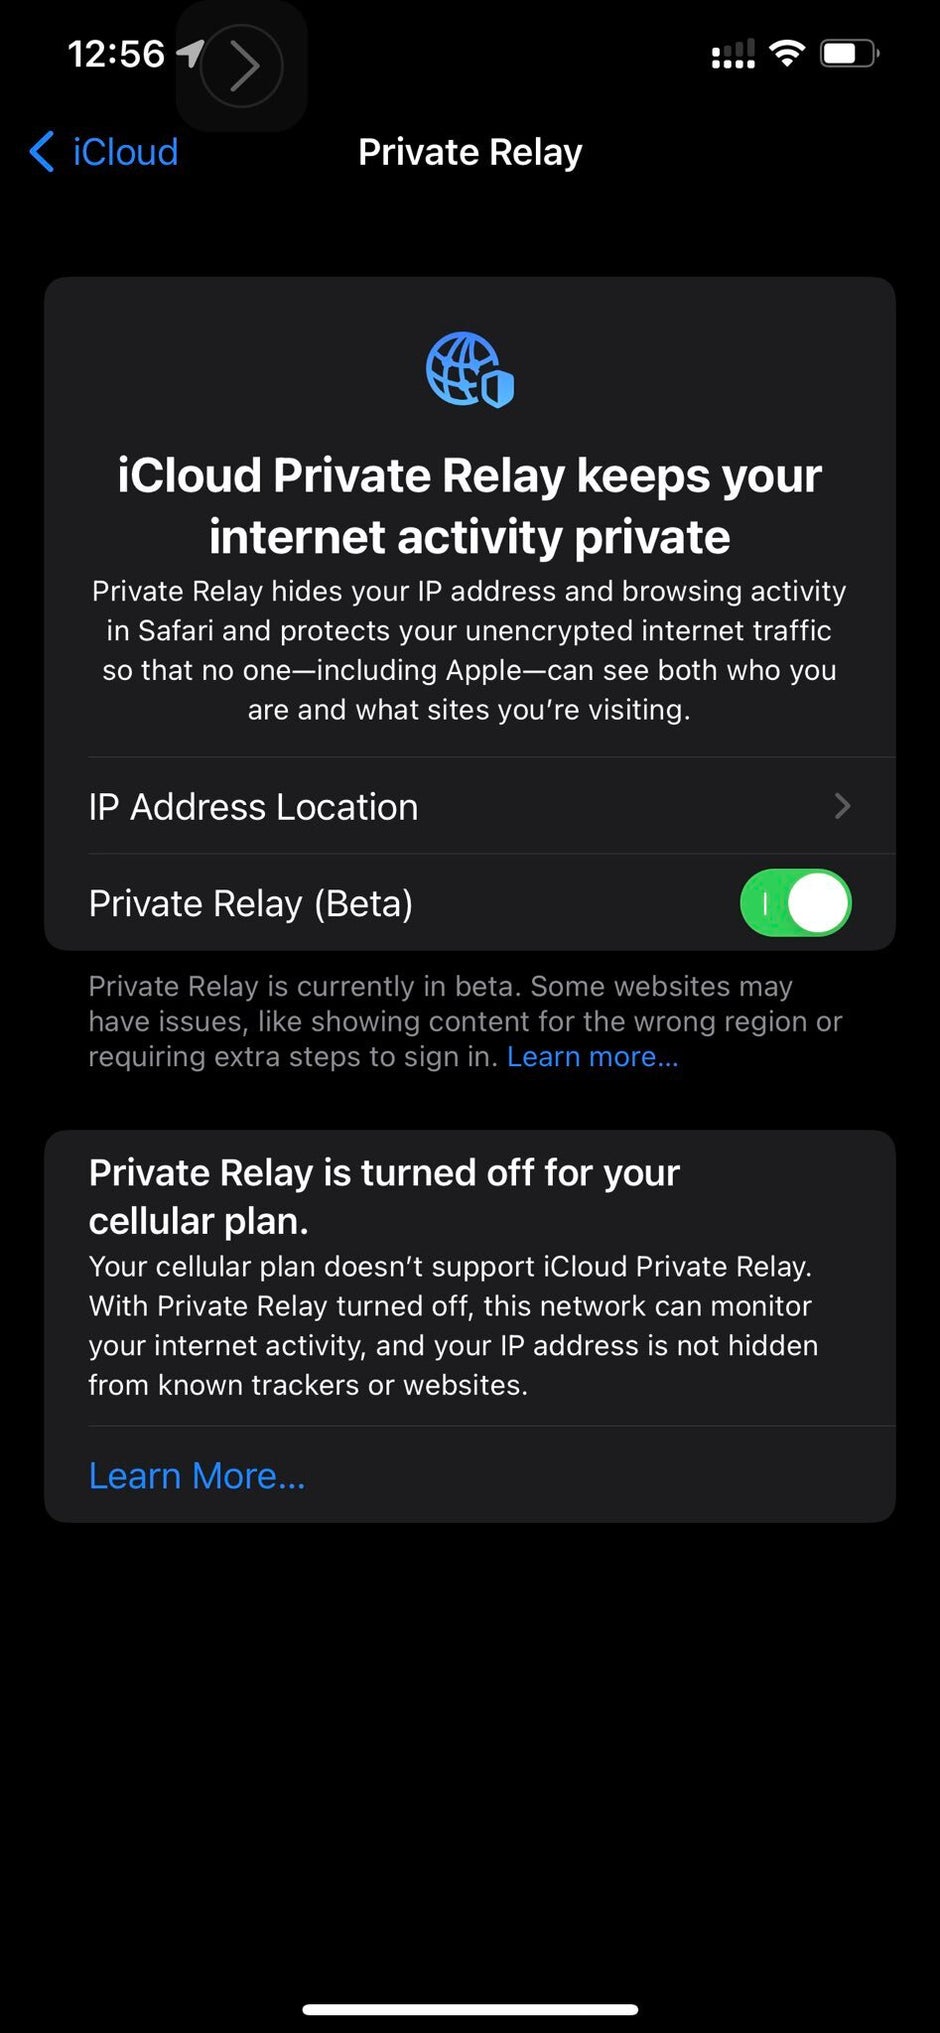 iCloud Private Relay T-Mobile warning - The iOS 15.3 update release will fix iCloud Private Relay warnings on T-Mobile plans